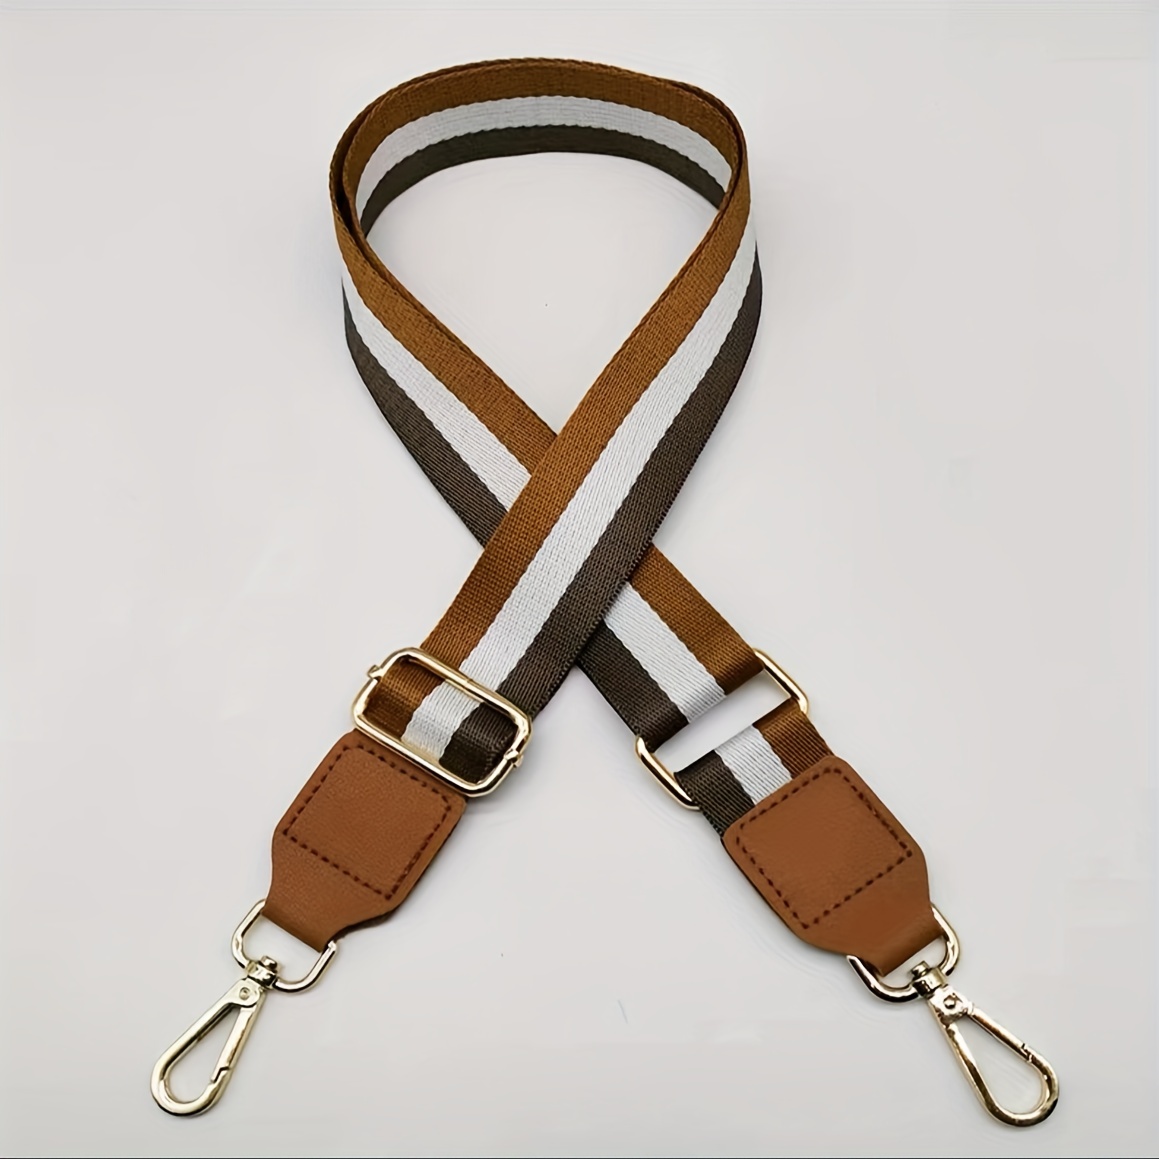 Purse Strap Universal Adjustable with No Punching Buckle Bag Shoulder Strap  Cross Body Strap for Small Bag Briefcase Purse DIY Modification Brown 